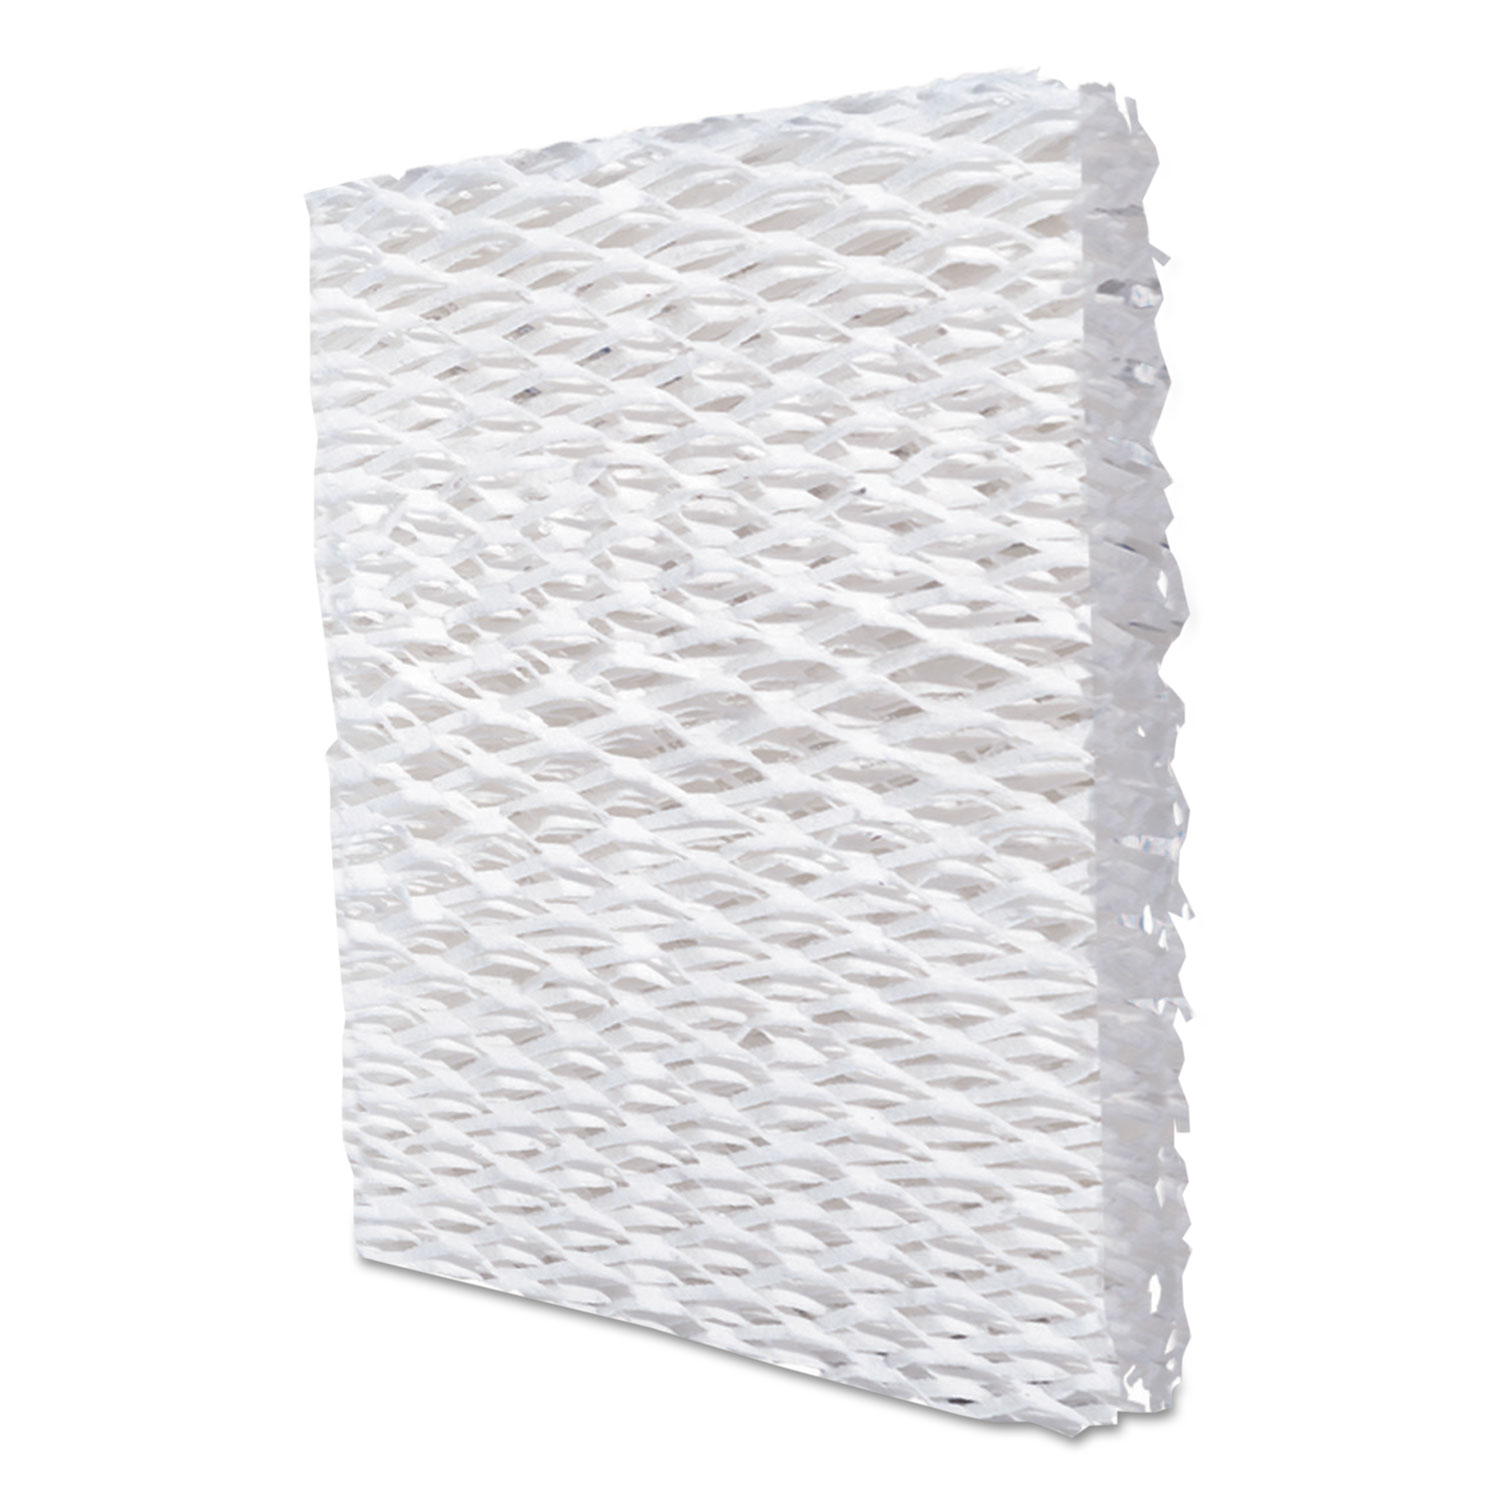  Honeywell HAC-700 Humidifier Replacement Filter for HCM-750 (HWLHAC700PDQ) 